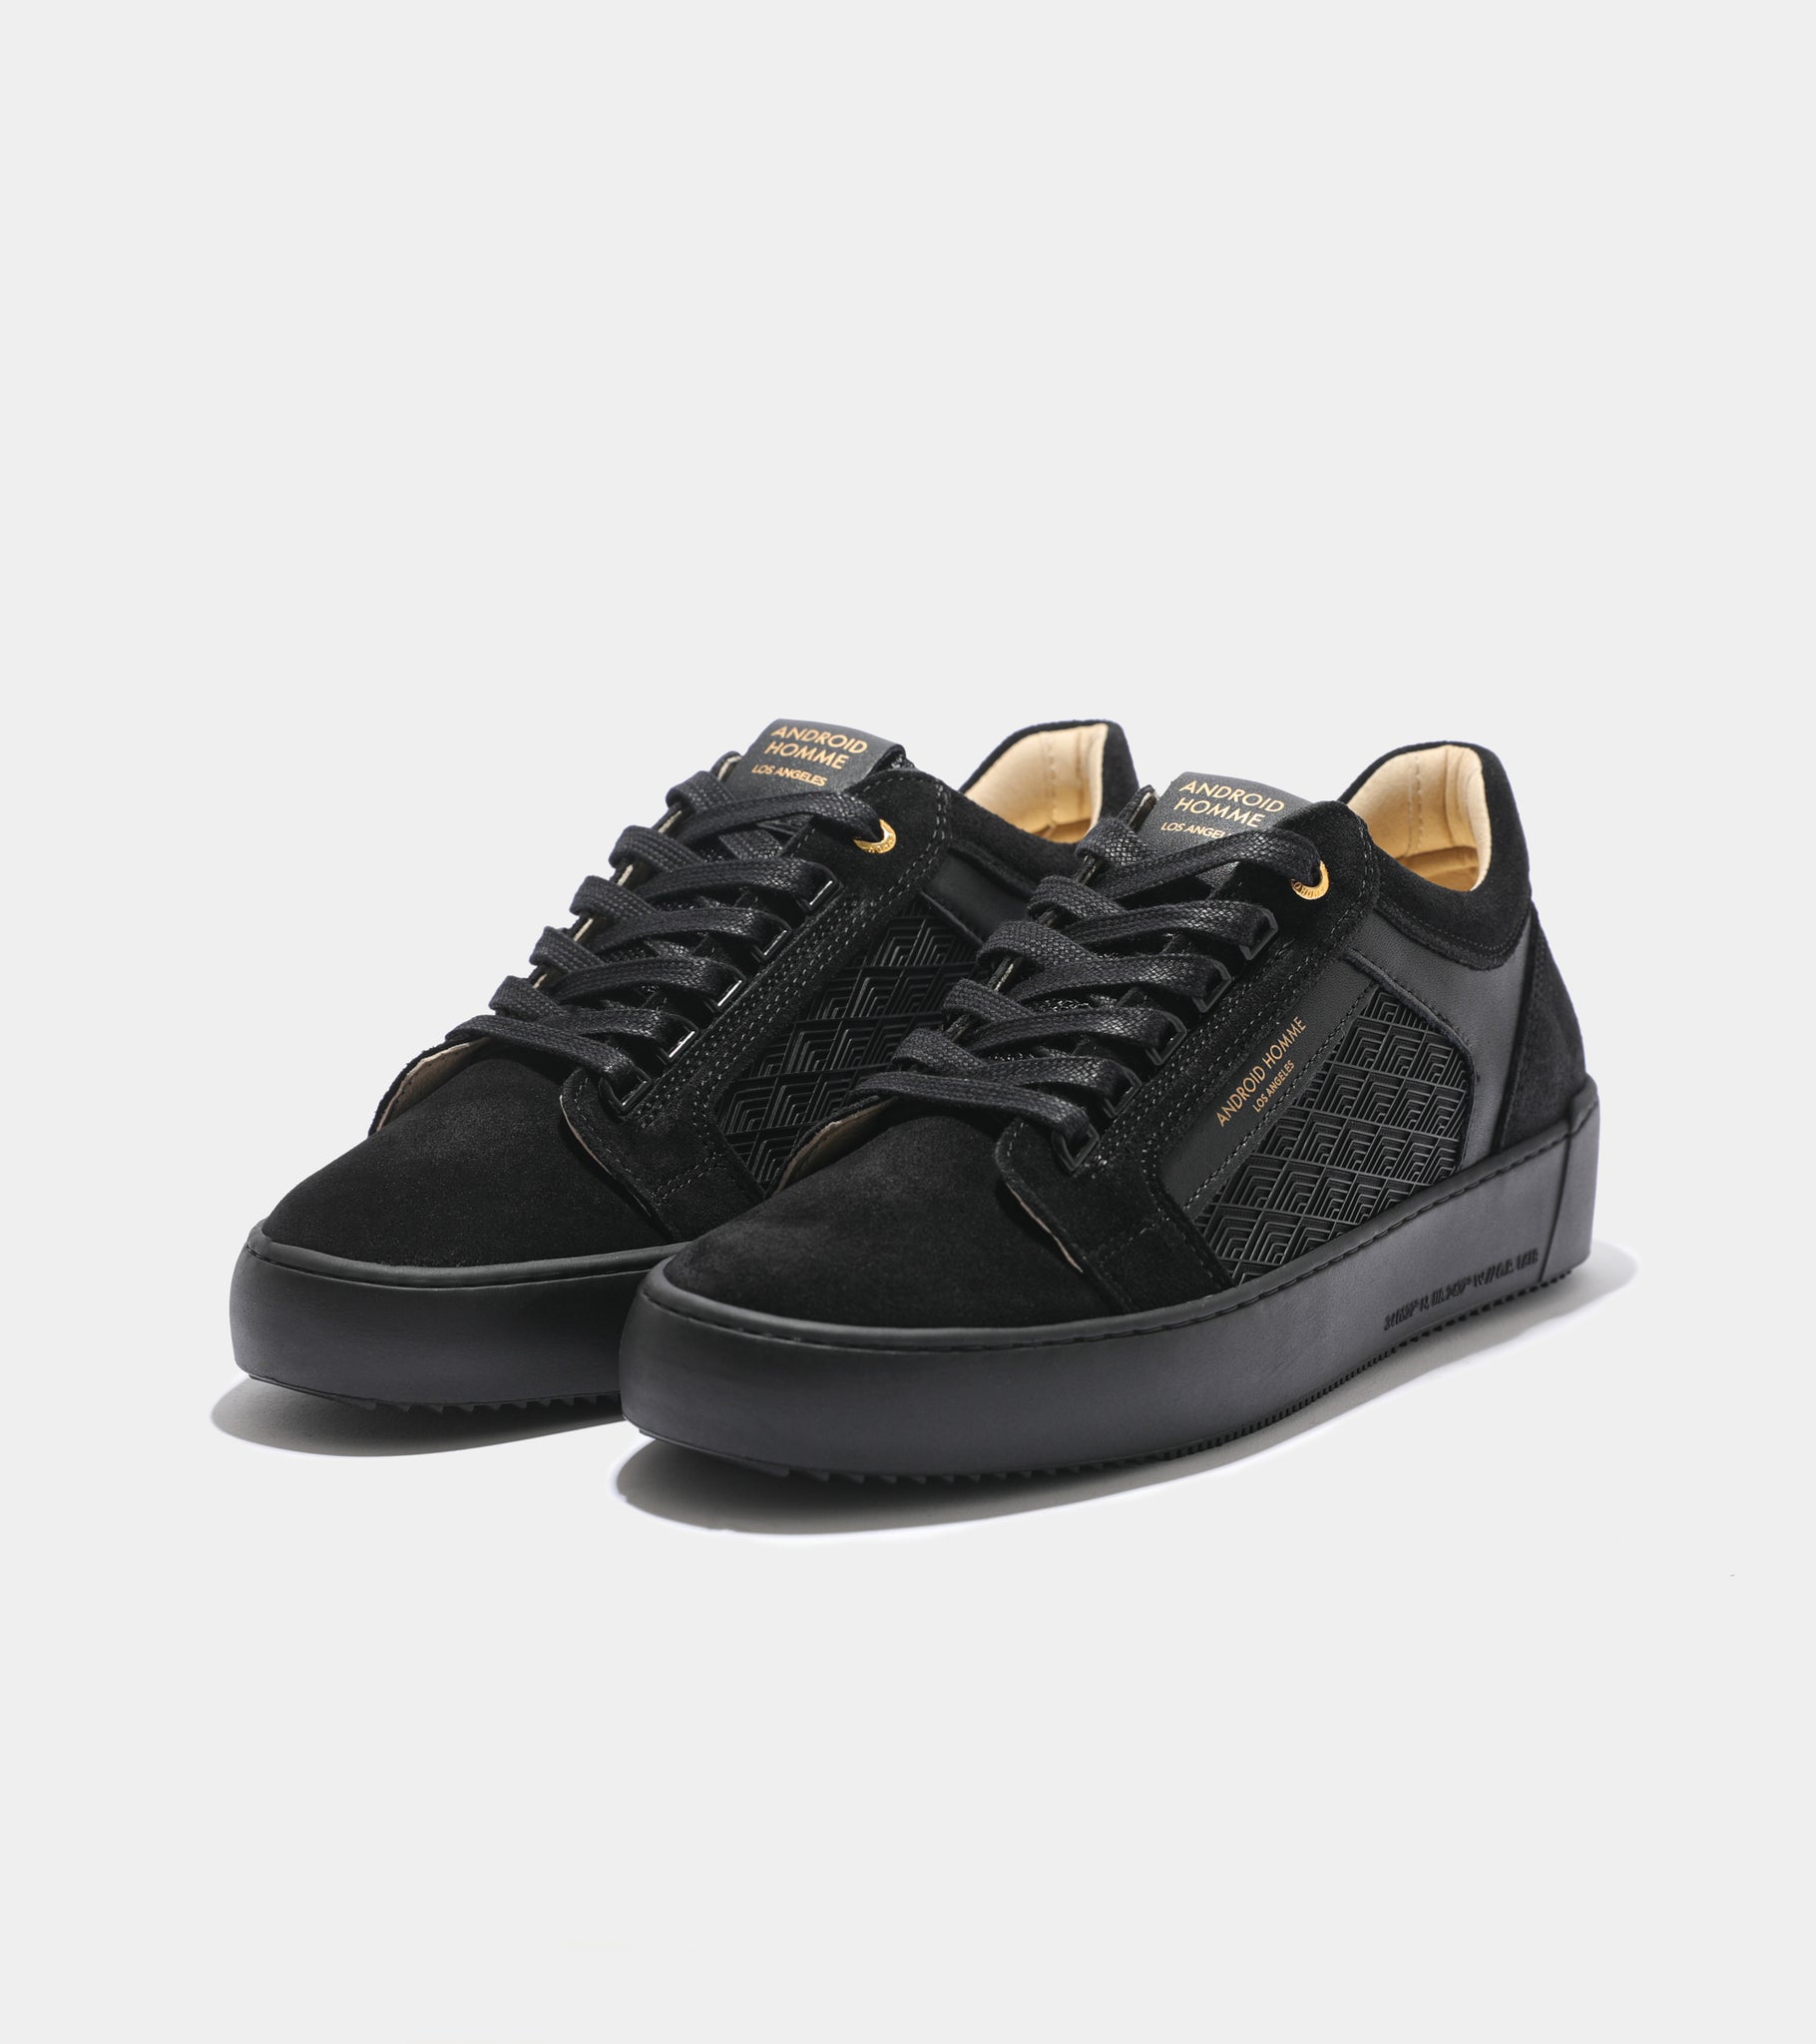 Detailed ecom imagery of the Venice Black Rubber Tipnet Android Homme Trainers with patterns.